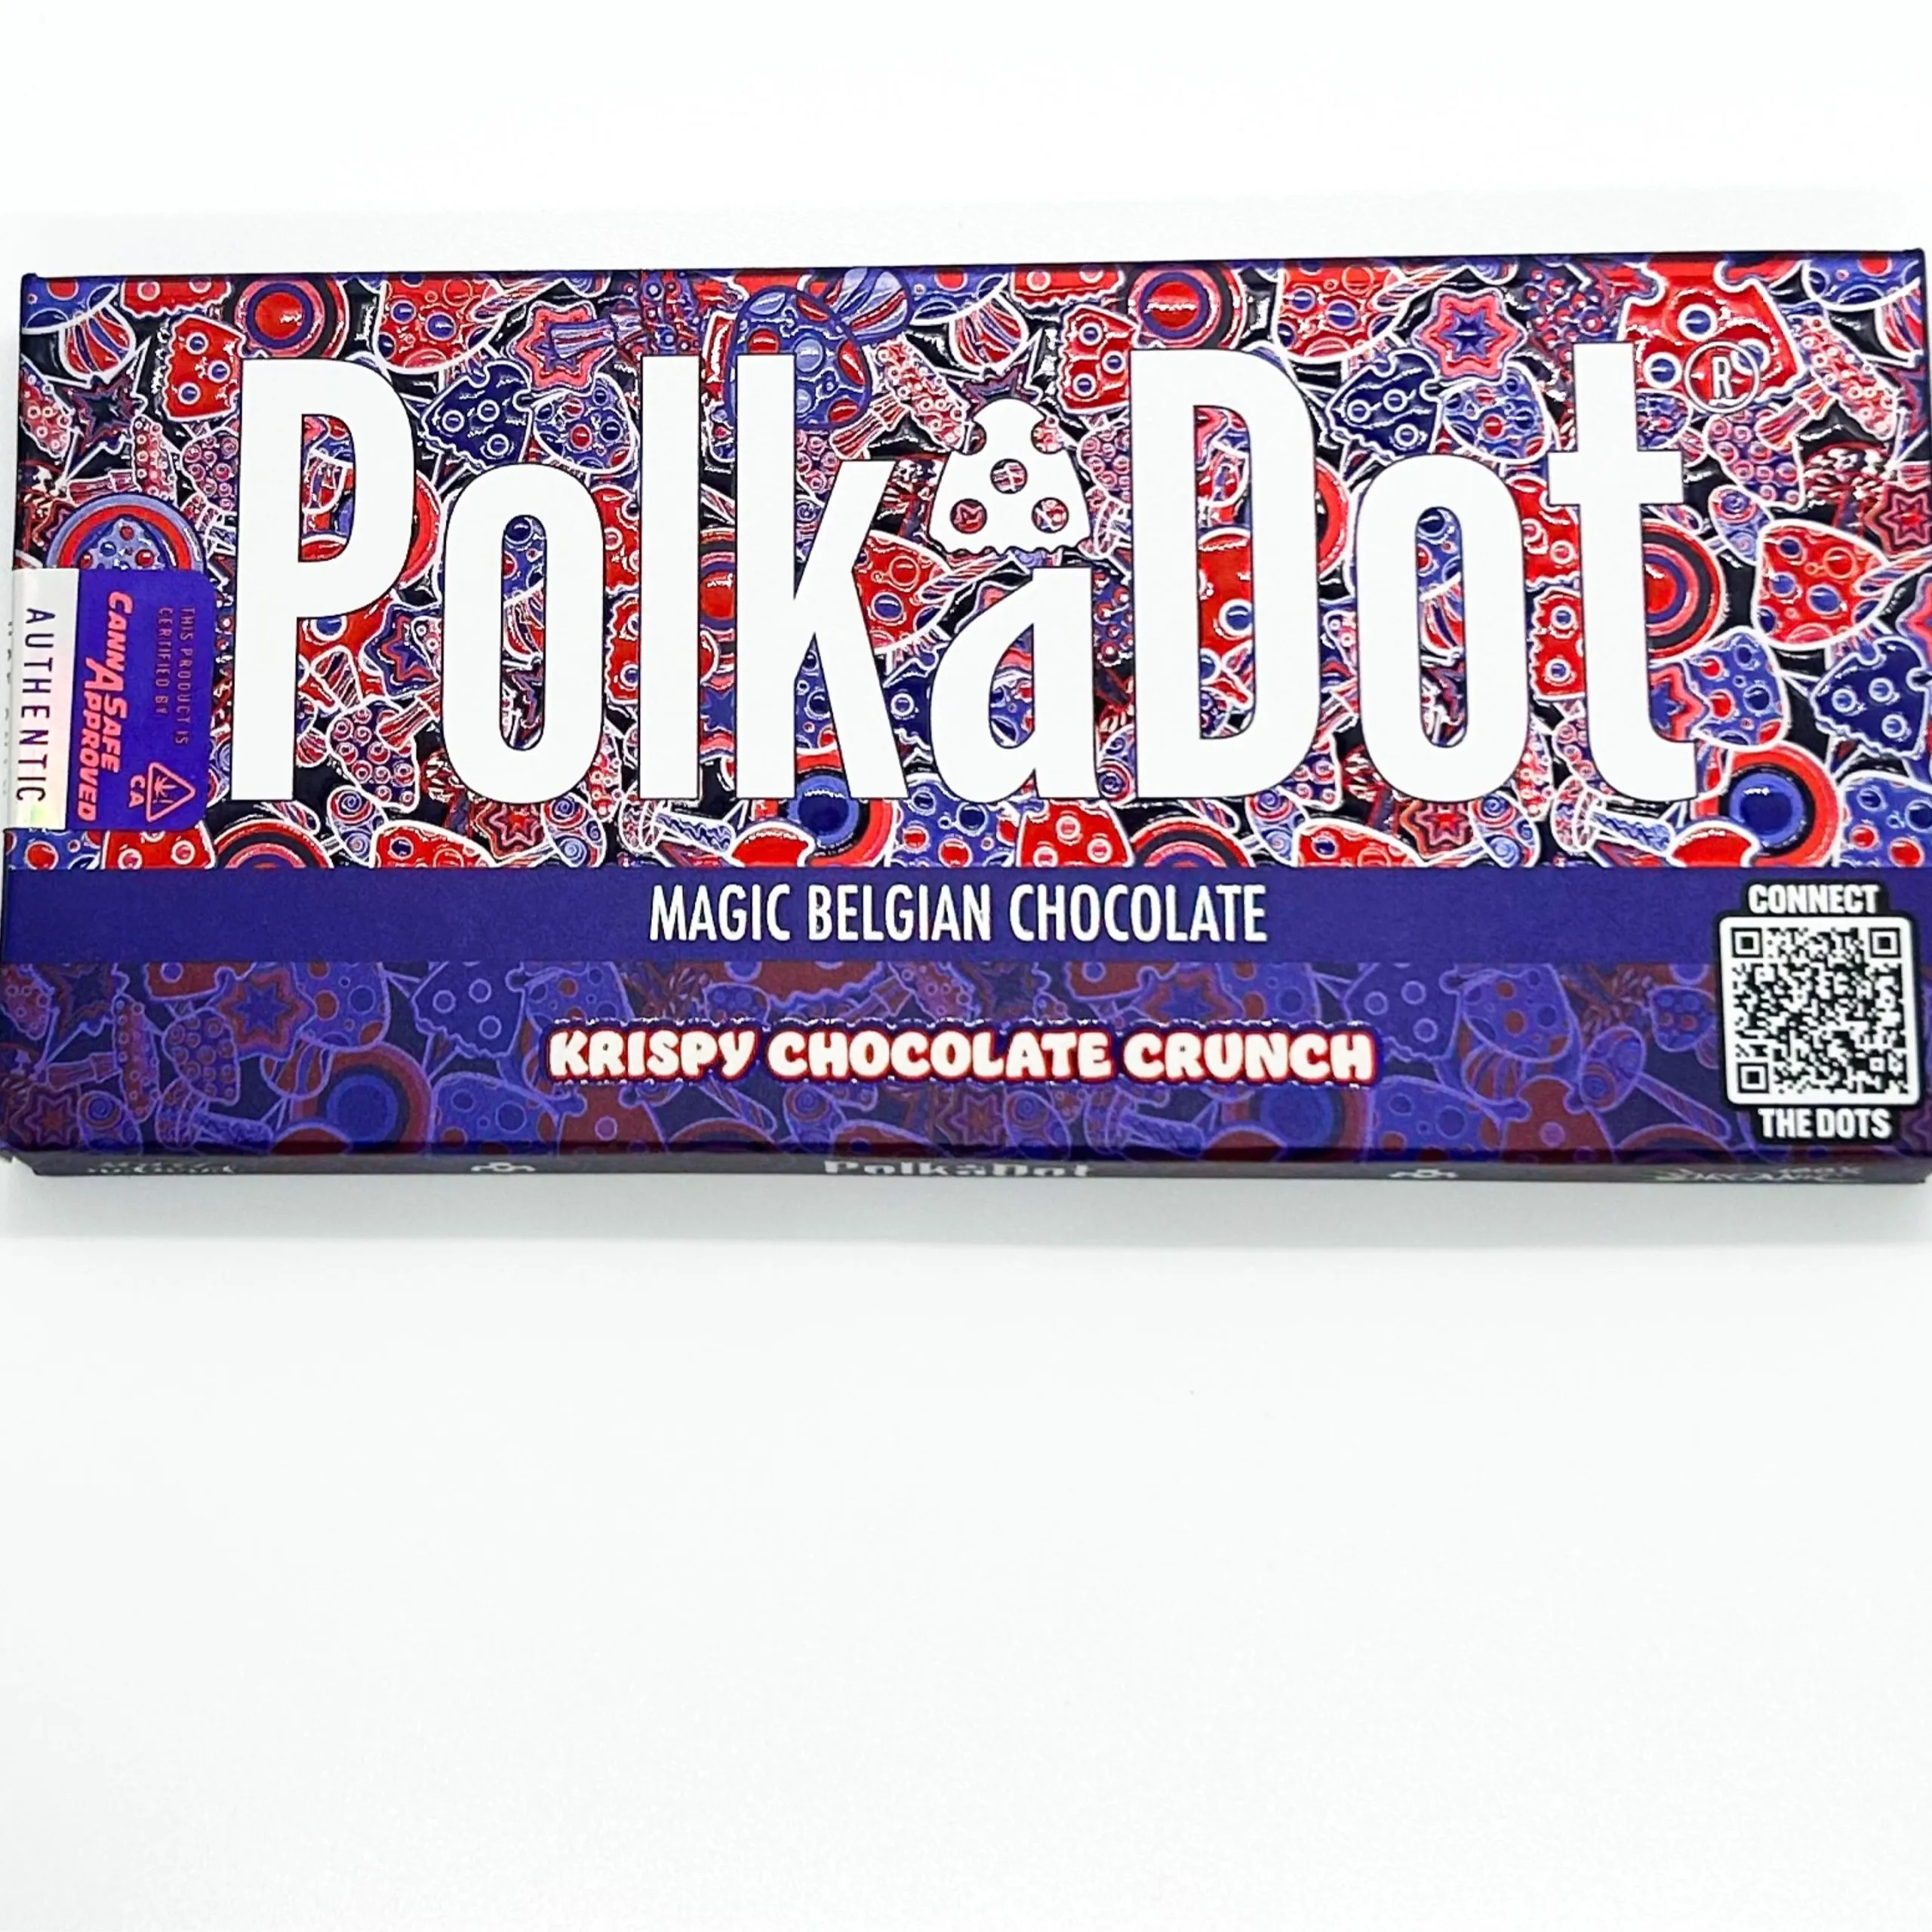 Polkadot Krispy Chocolate Crunch Every mouthful of the Polkadot Krispy Chocolate Crunch Chocolate Bar is a delicious explosion of taste and texture